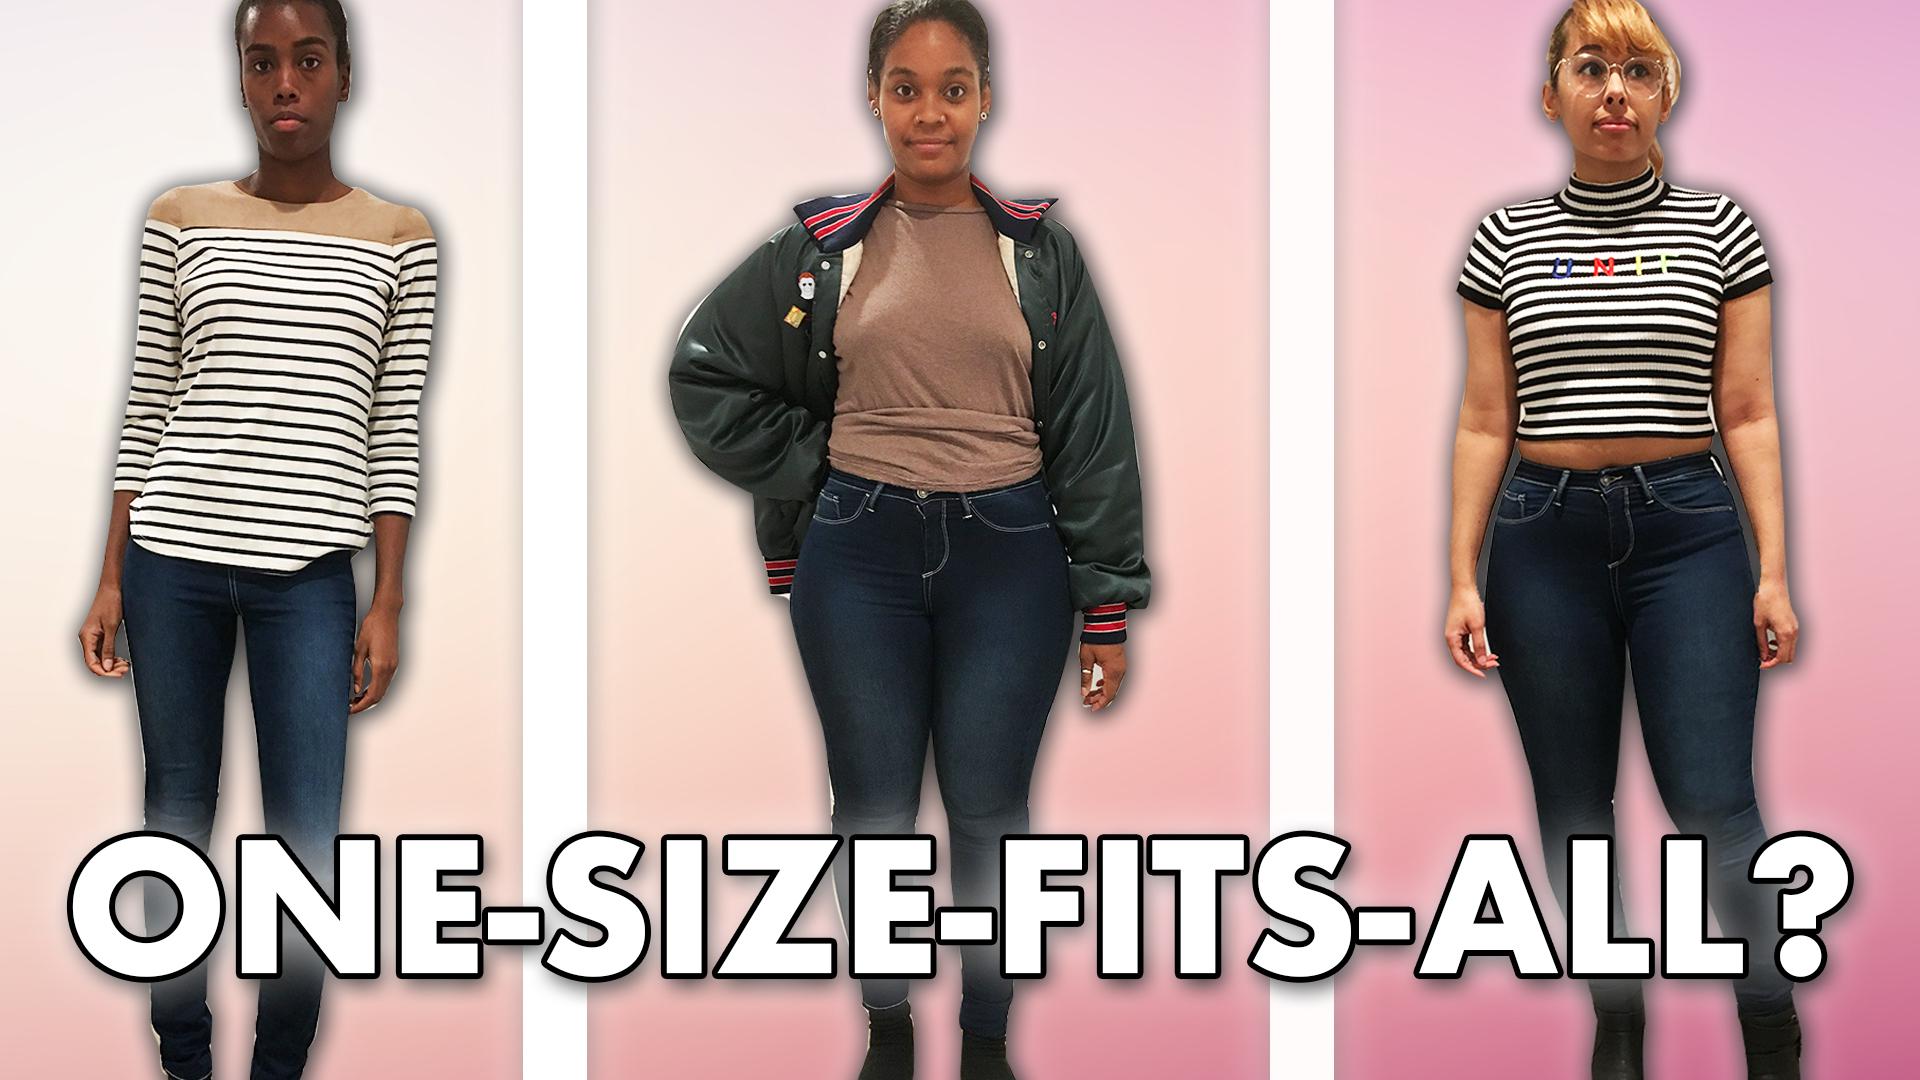 This Is What a One Size Fits Most Outfit Looks Like On 3